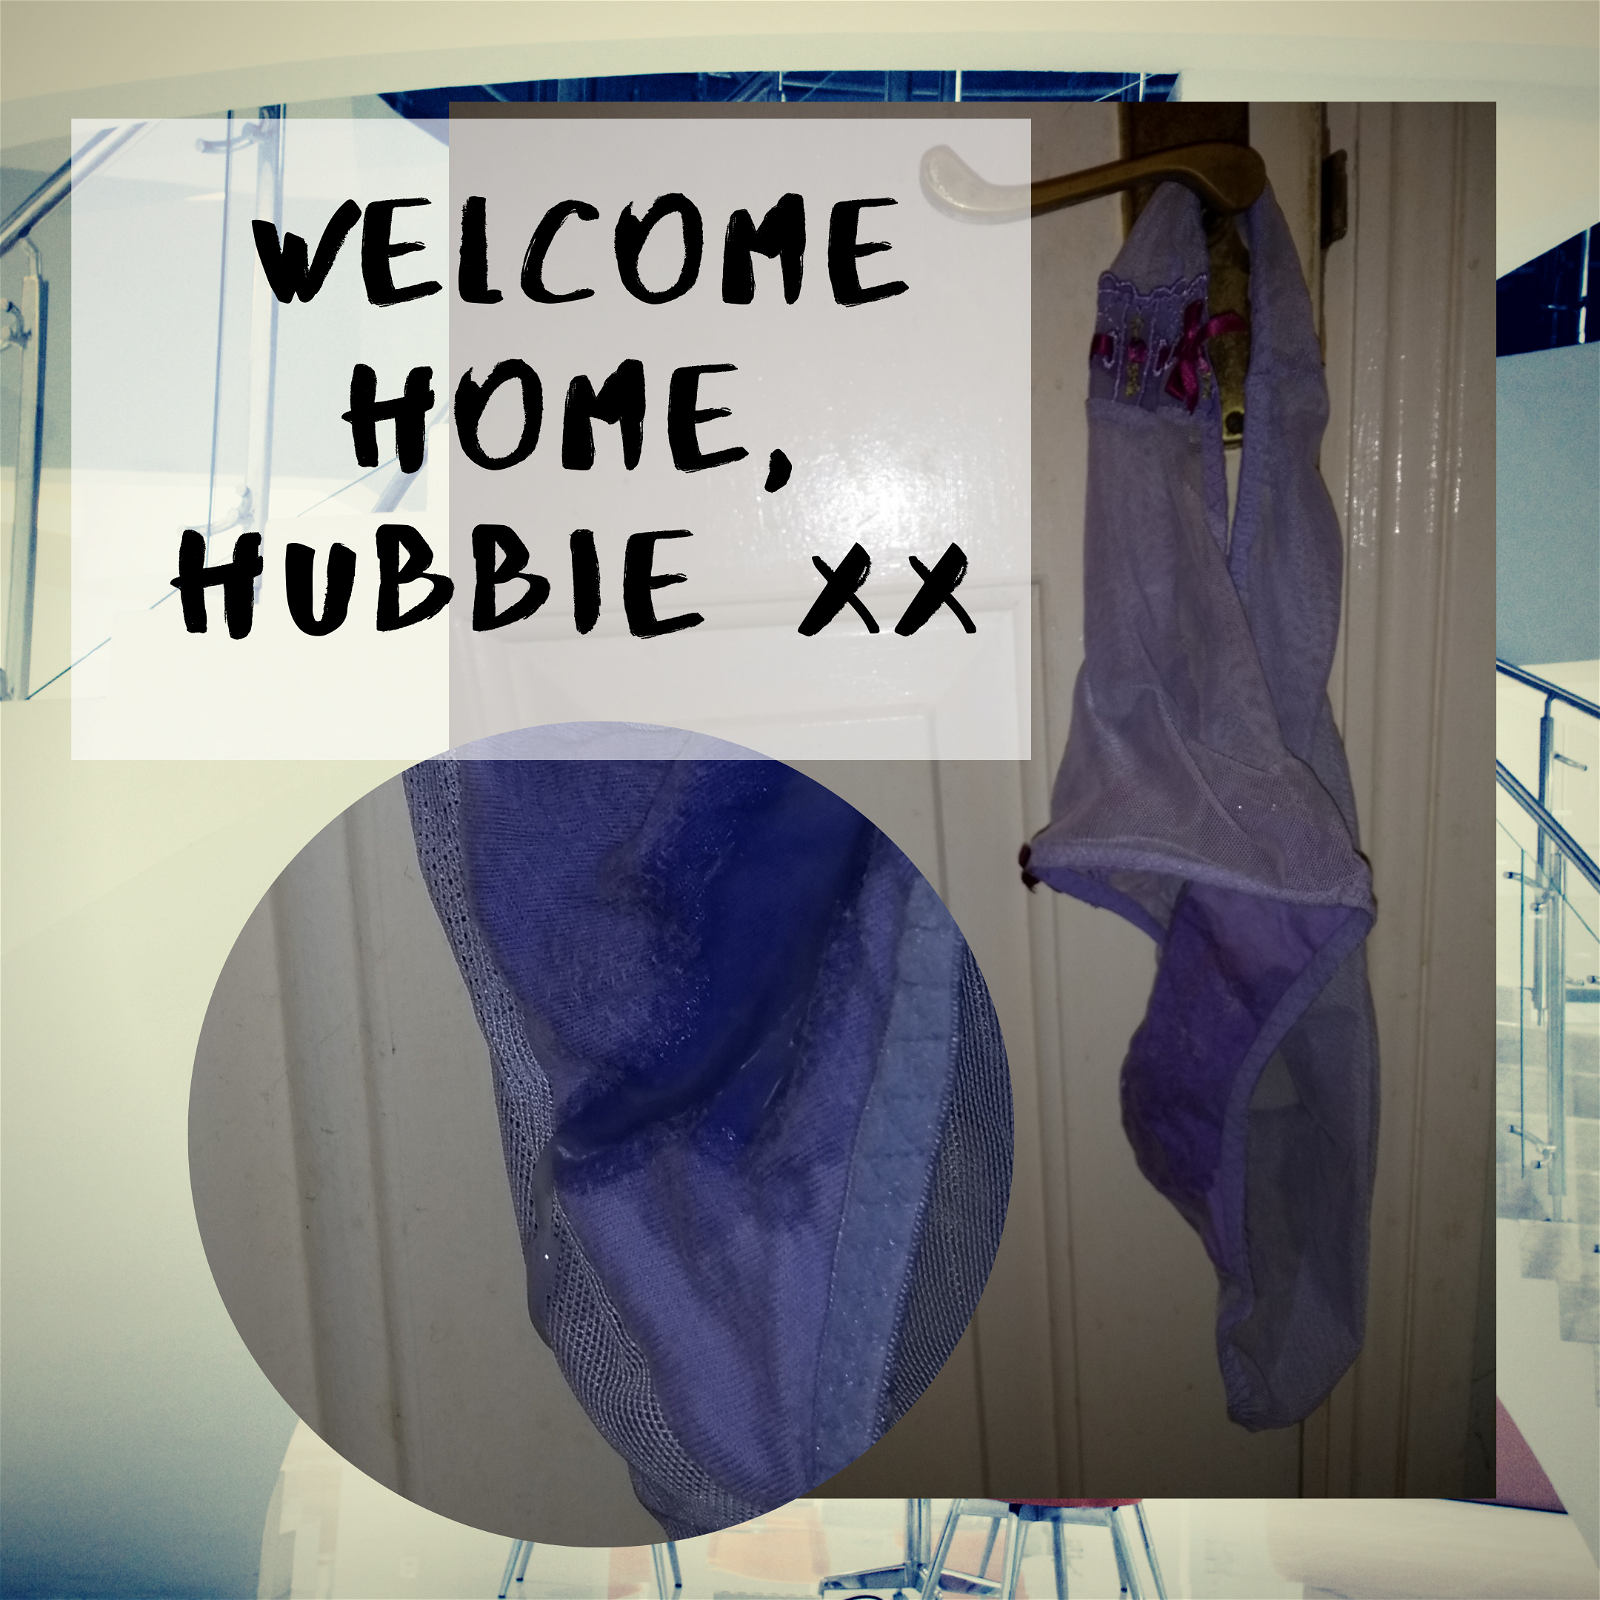 Photo by Hotwife Hubbie with the username @Hubb1e,  November 3, 2019 at 9:40 PM. The post is about the topic Wife warming and the text says 'After a few days away on a business trip, I came home late in the evening to find this hanging on the bedroom door. What a welcome home..'